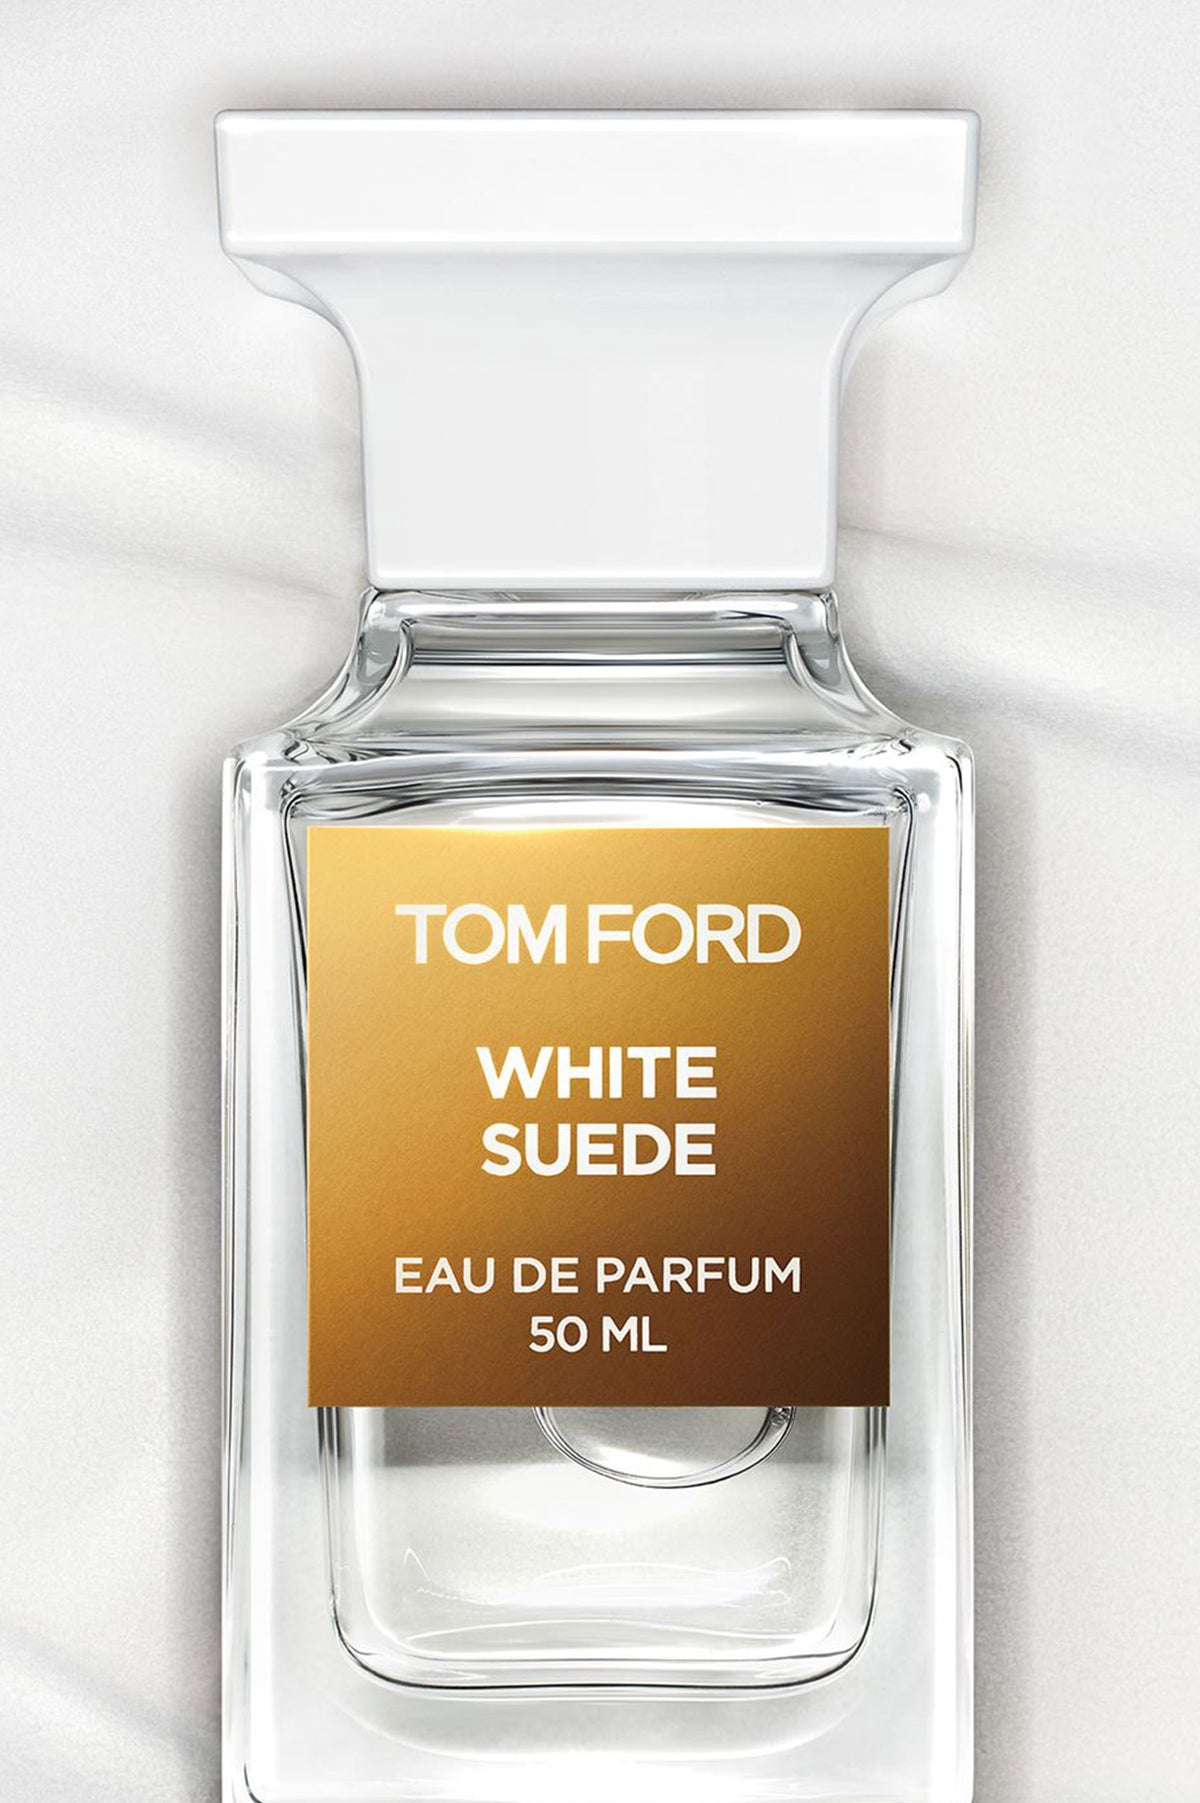 Tomford (white suede)